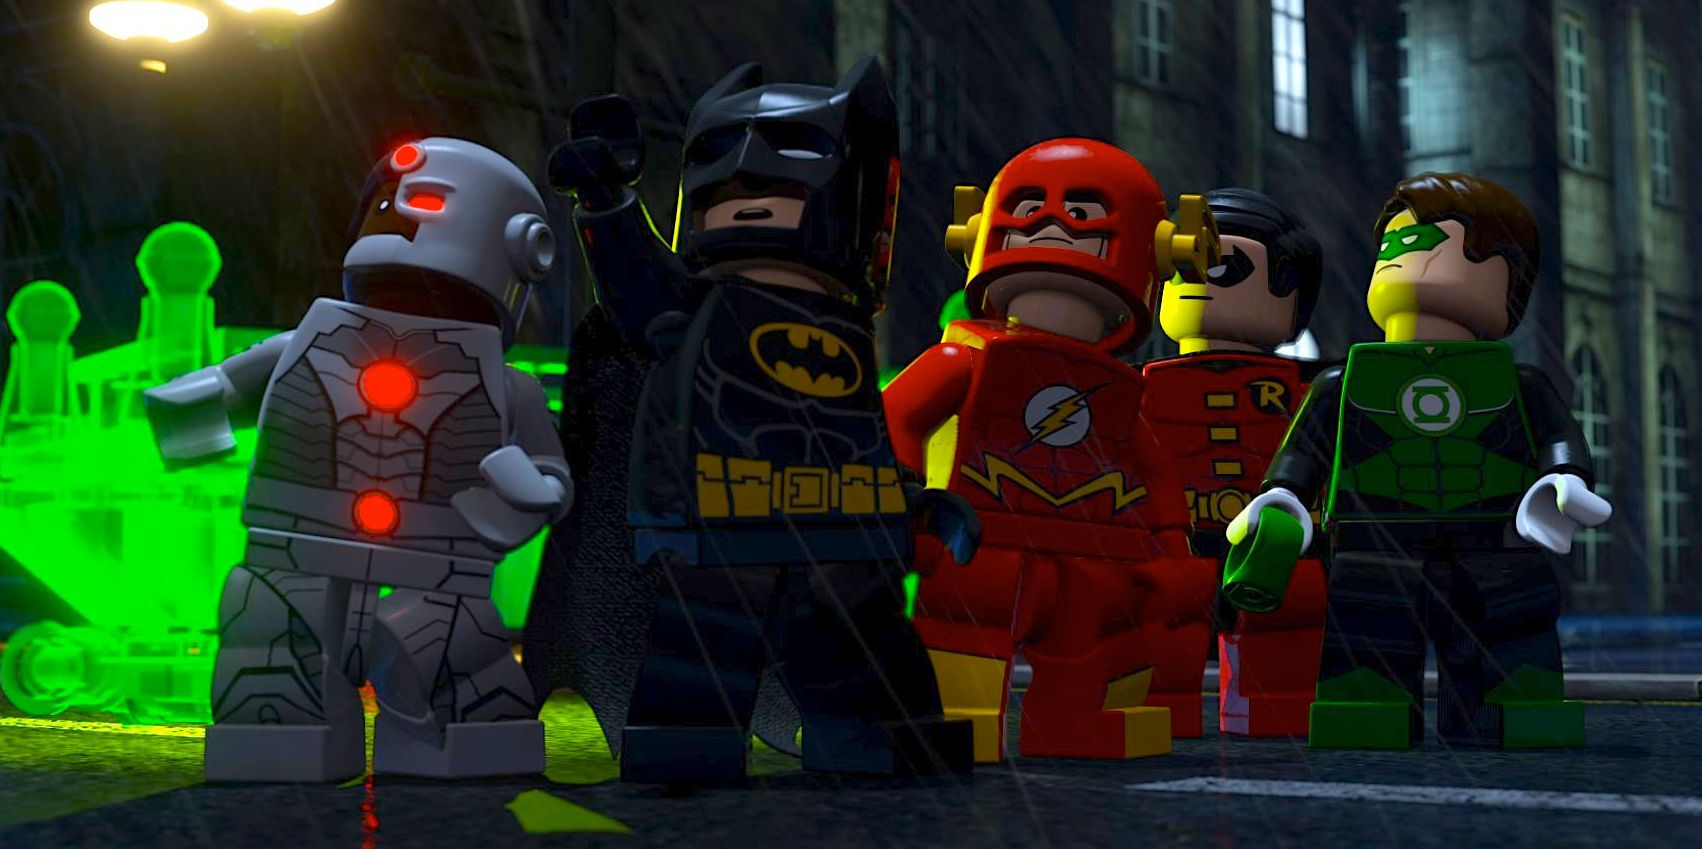 Box Office: The LEGO Movie destroys it's competition for the third straight weekend